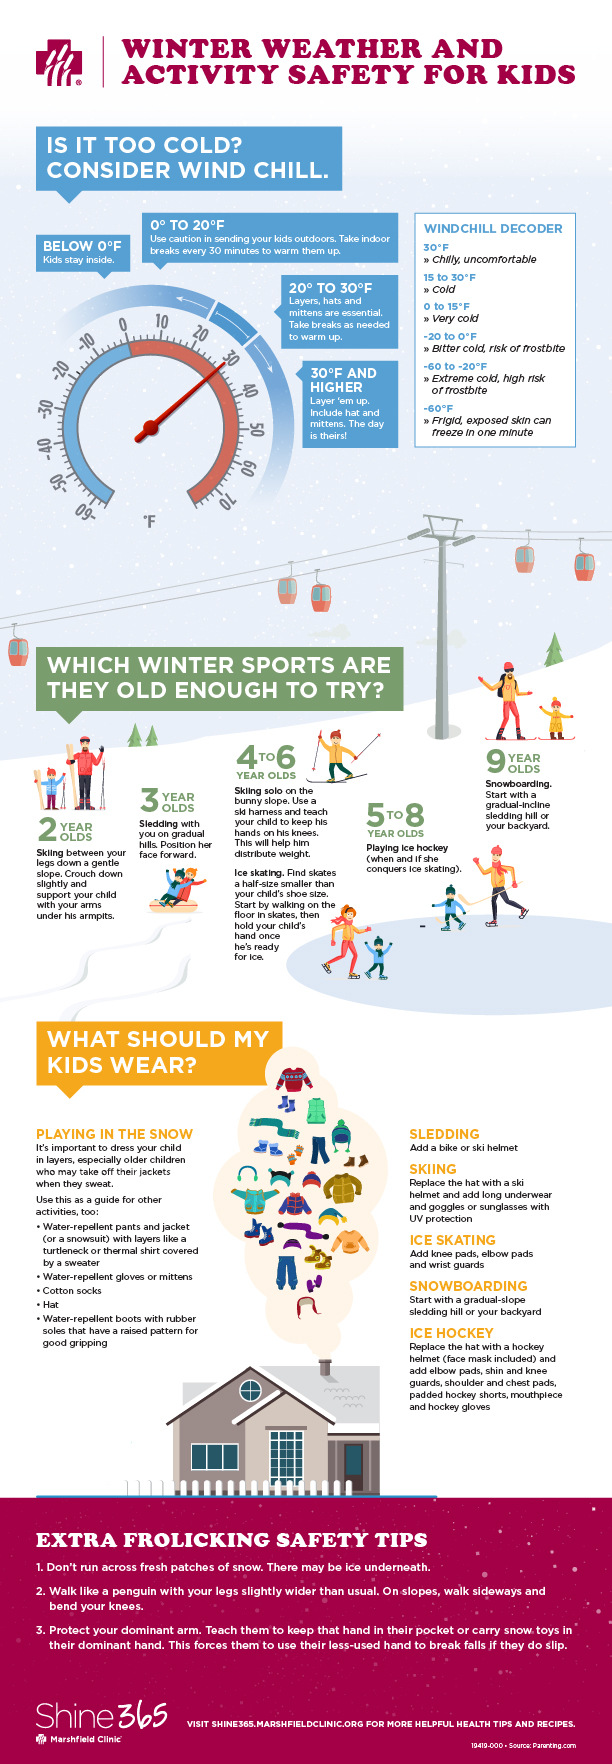 Winter Weather and Activity Safety for Kids - Infographic